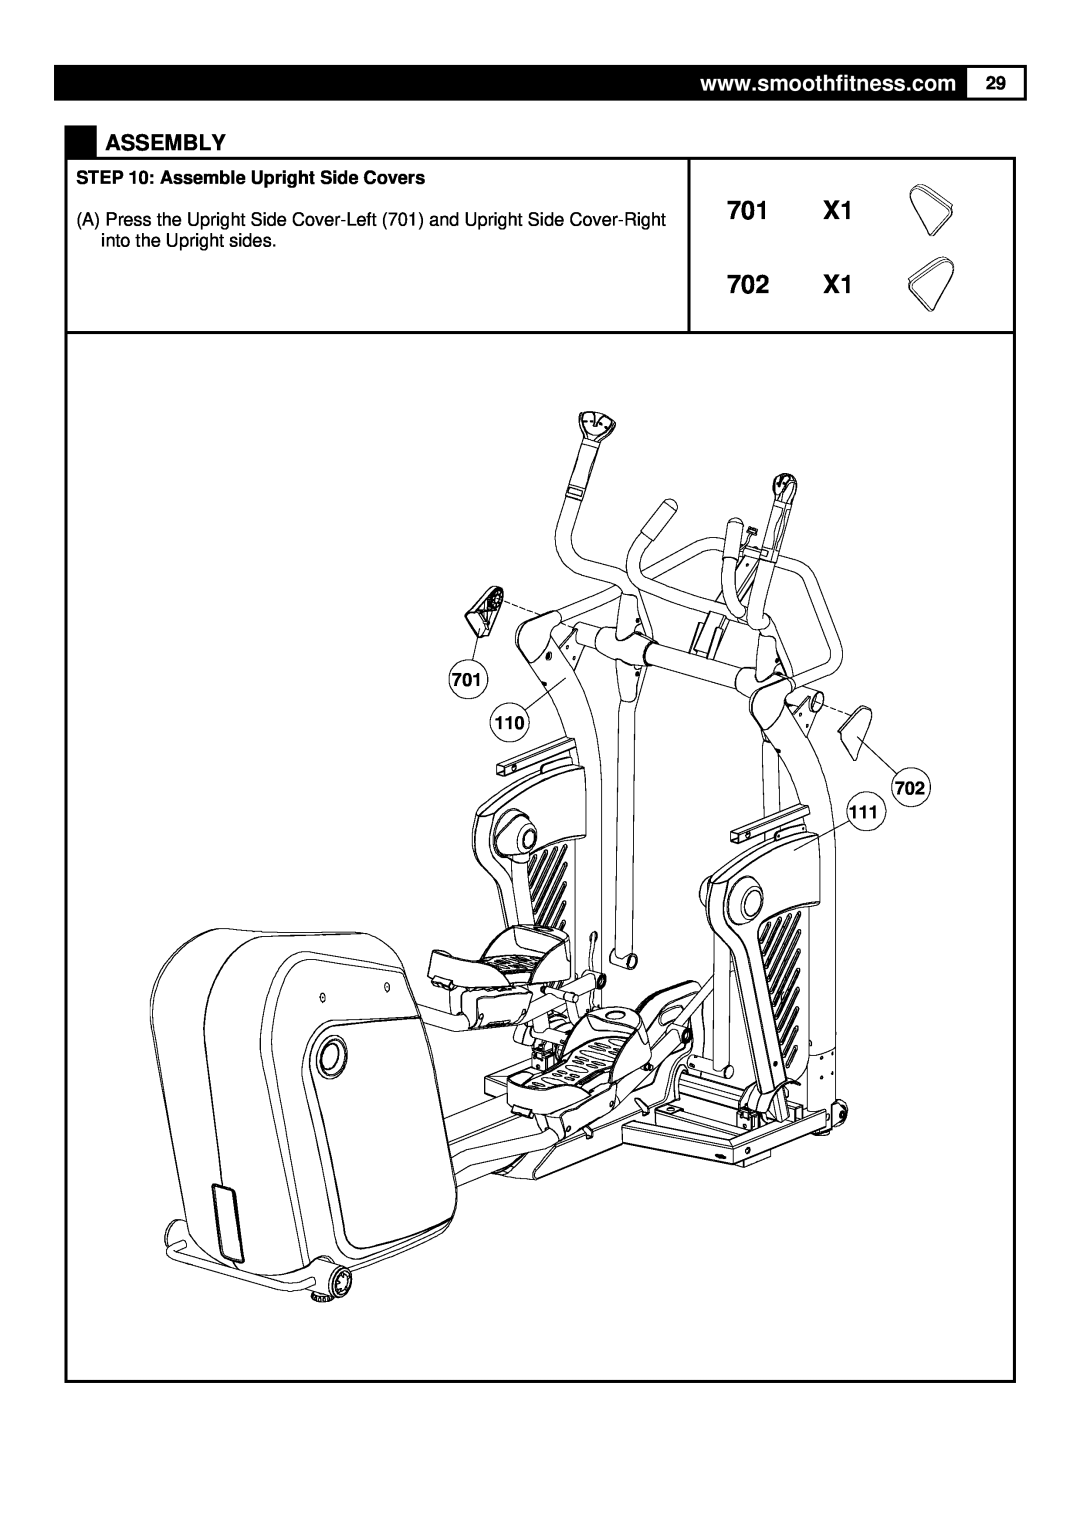 Smooth Fitness 9.25X user manual 701 702, Assembly, Assemble Upright Side Covers, 701 110 702 111 